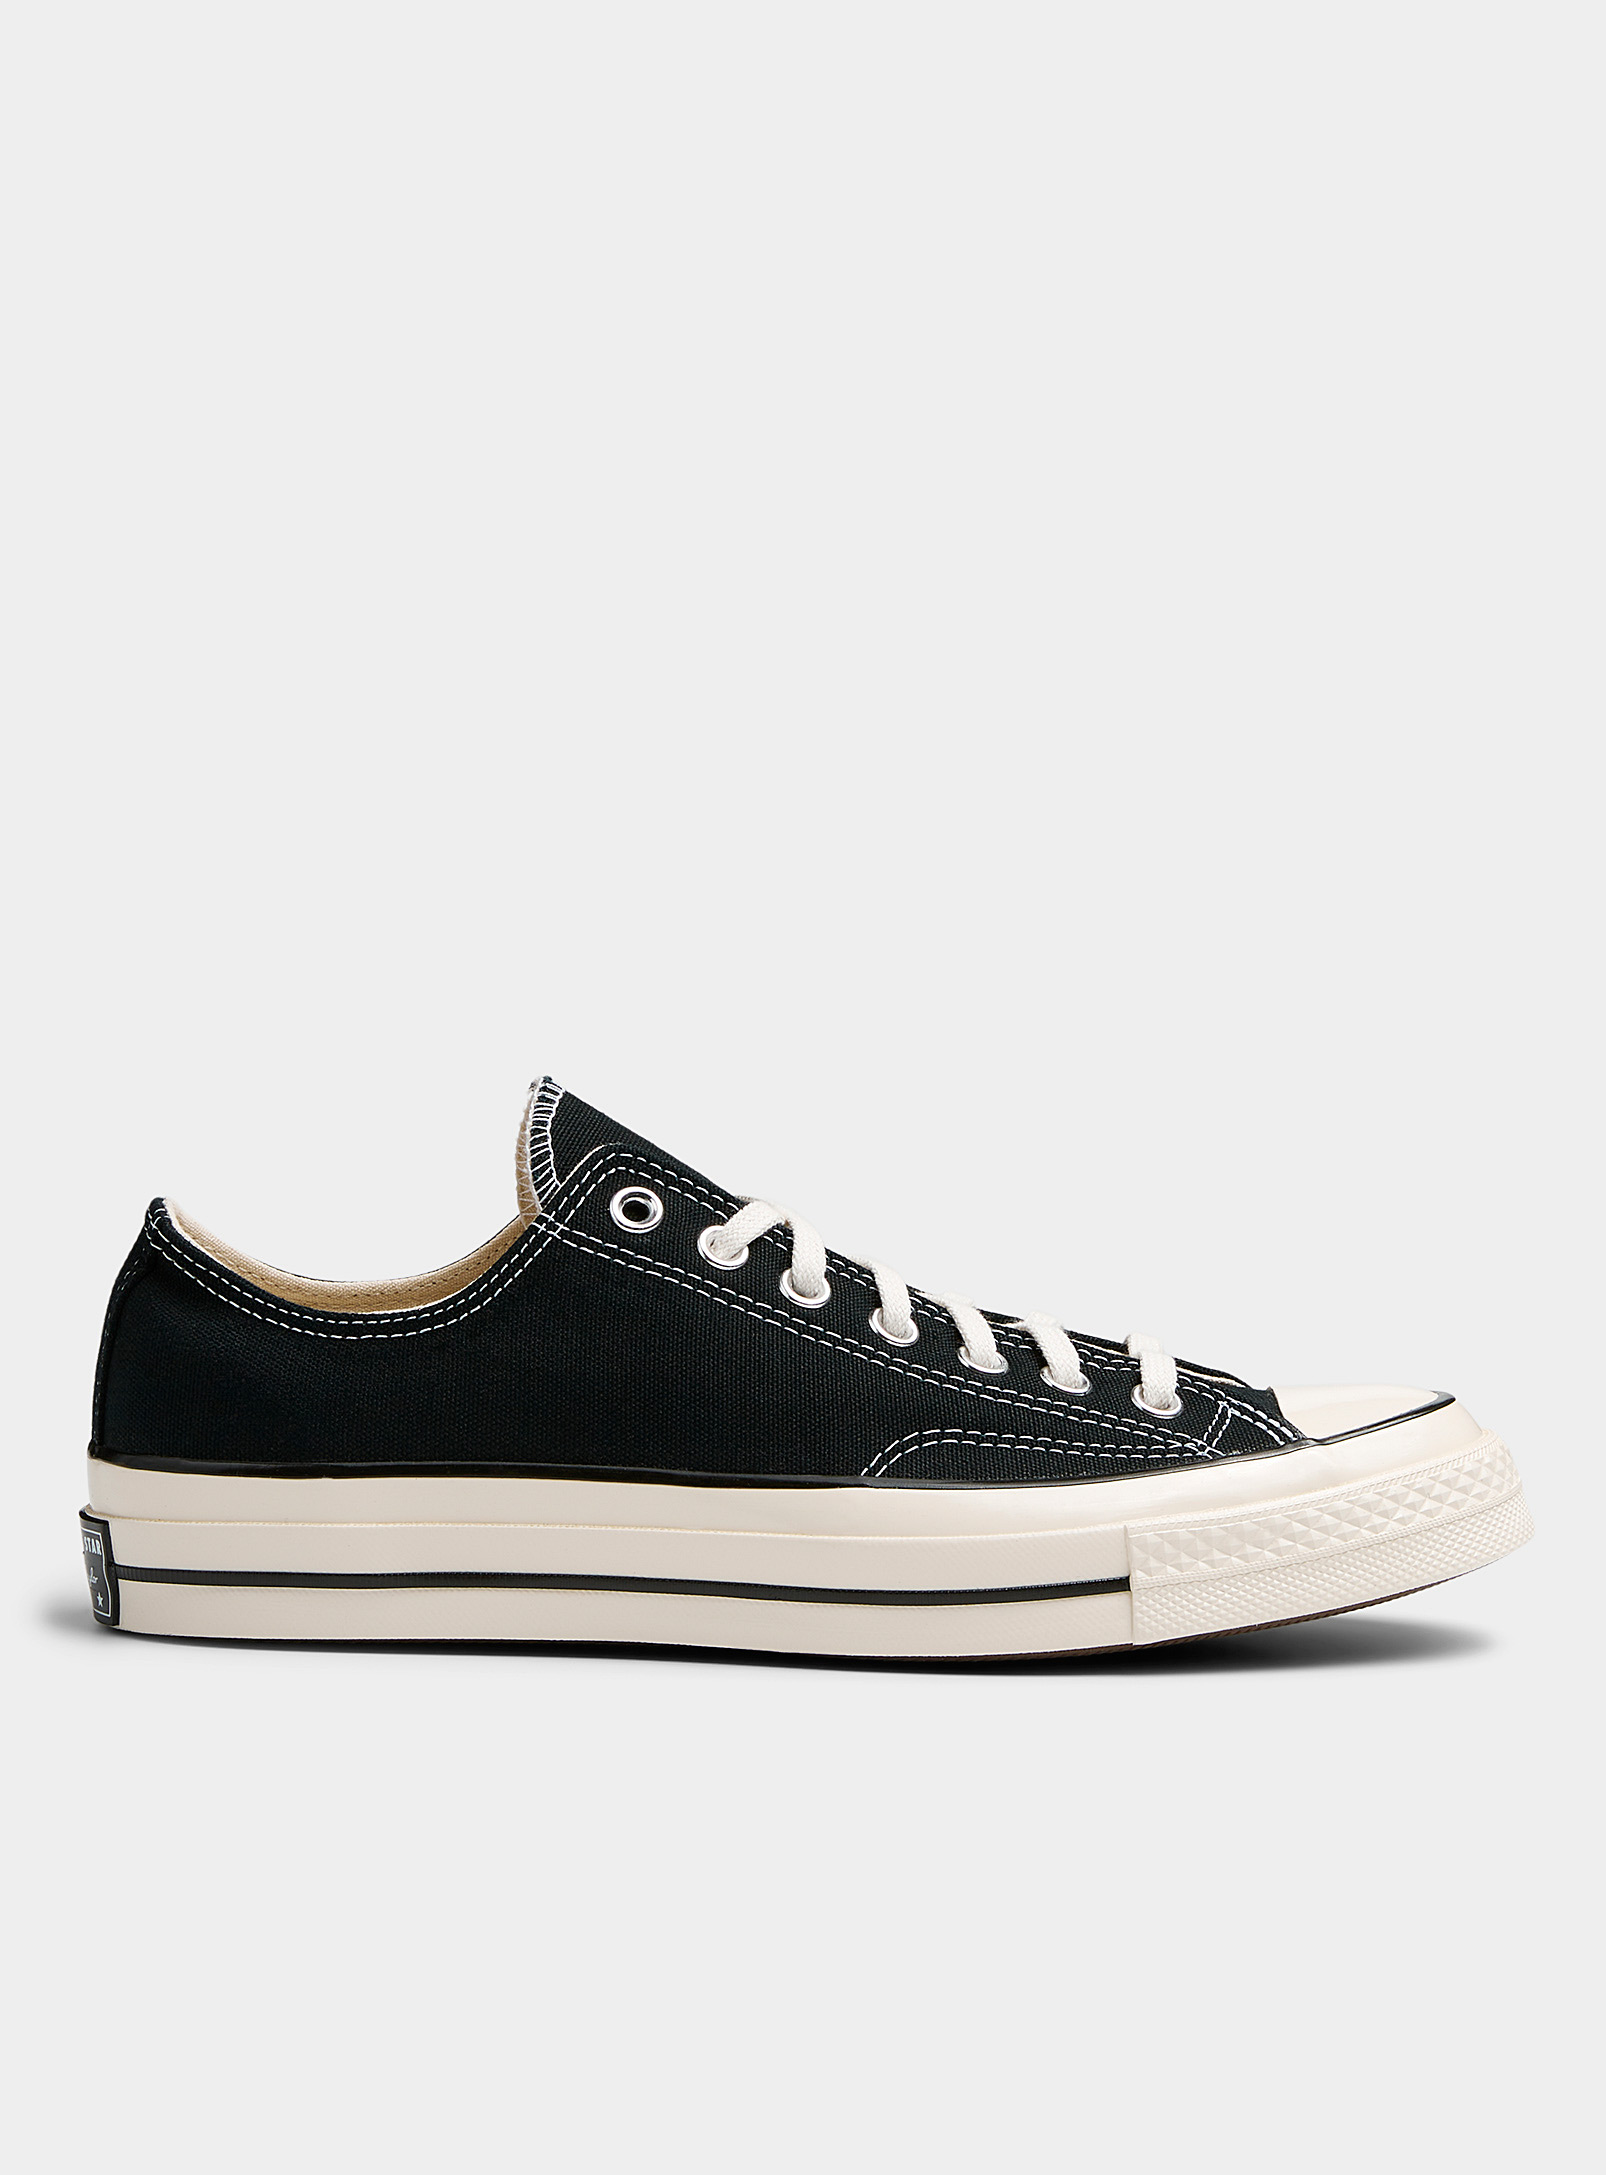 Converse Chuck 70 Ox Canvas Sneakers In Black